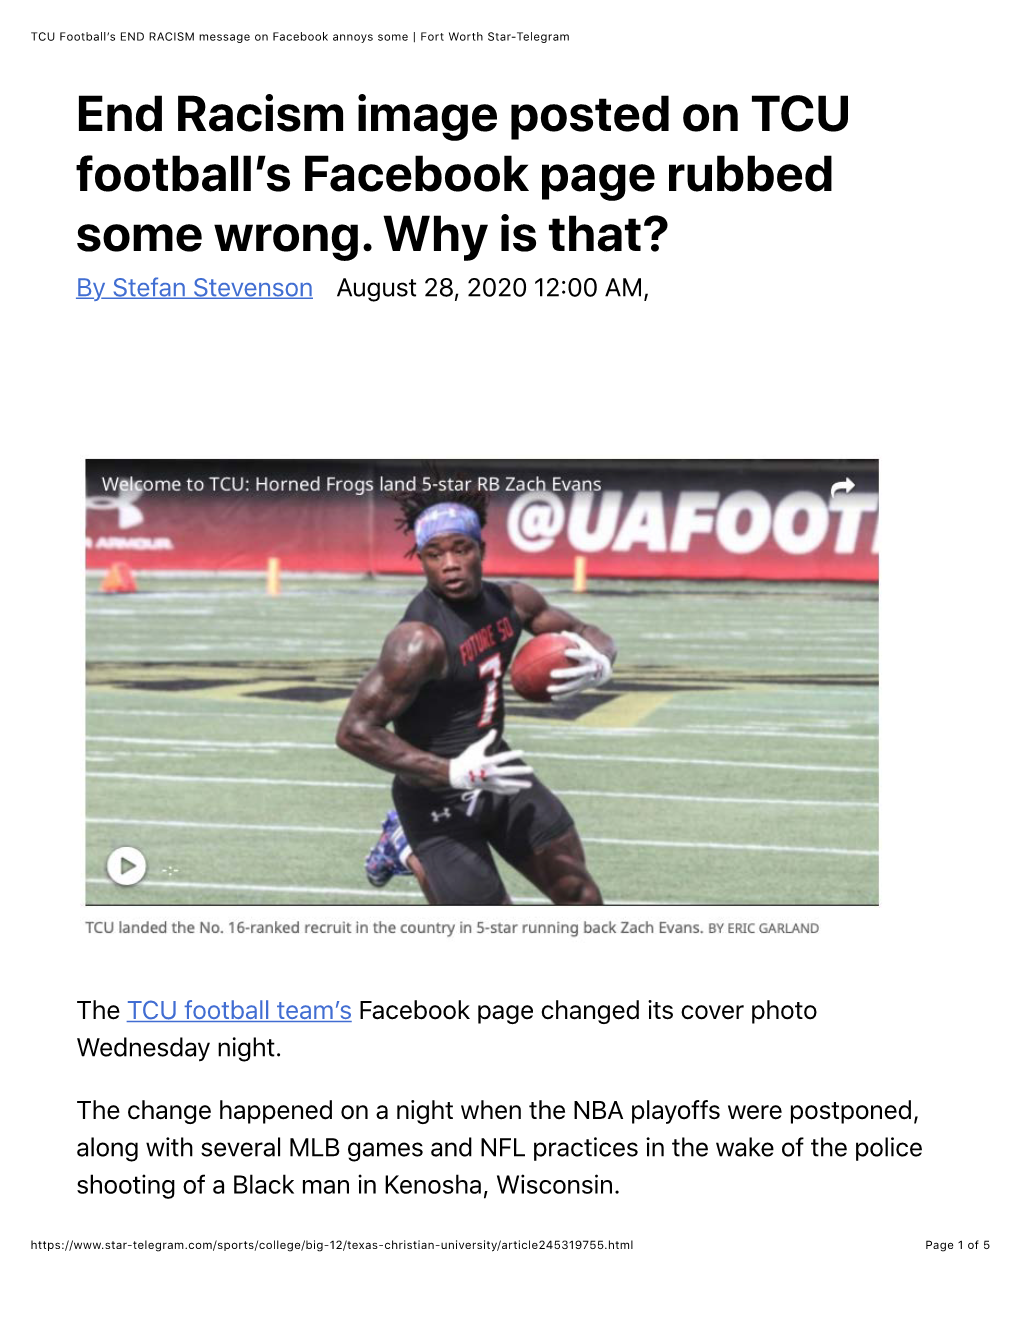 TCU Football's END RACISM Message on Facebook Annoys Some | Fort Worth Star-Telegram